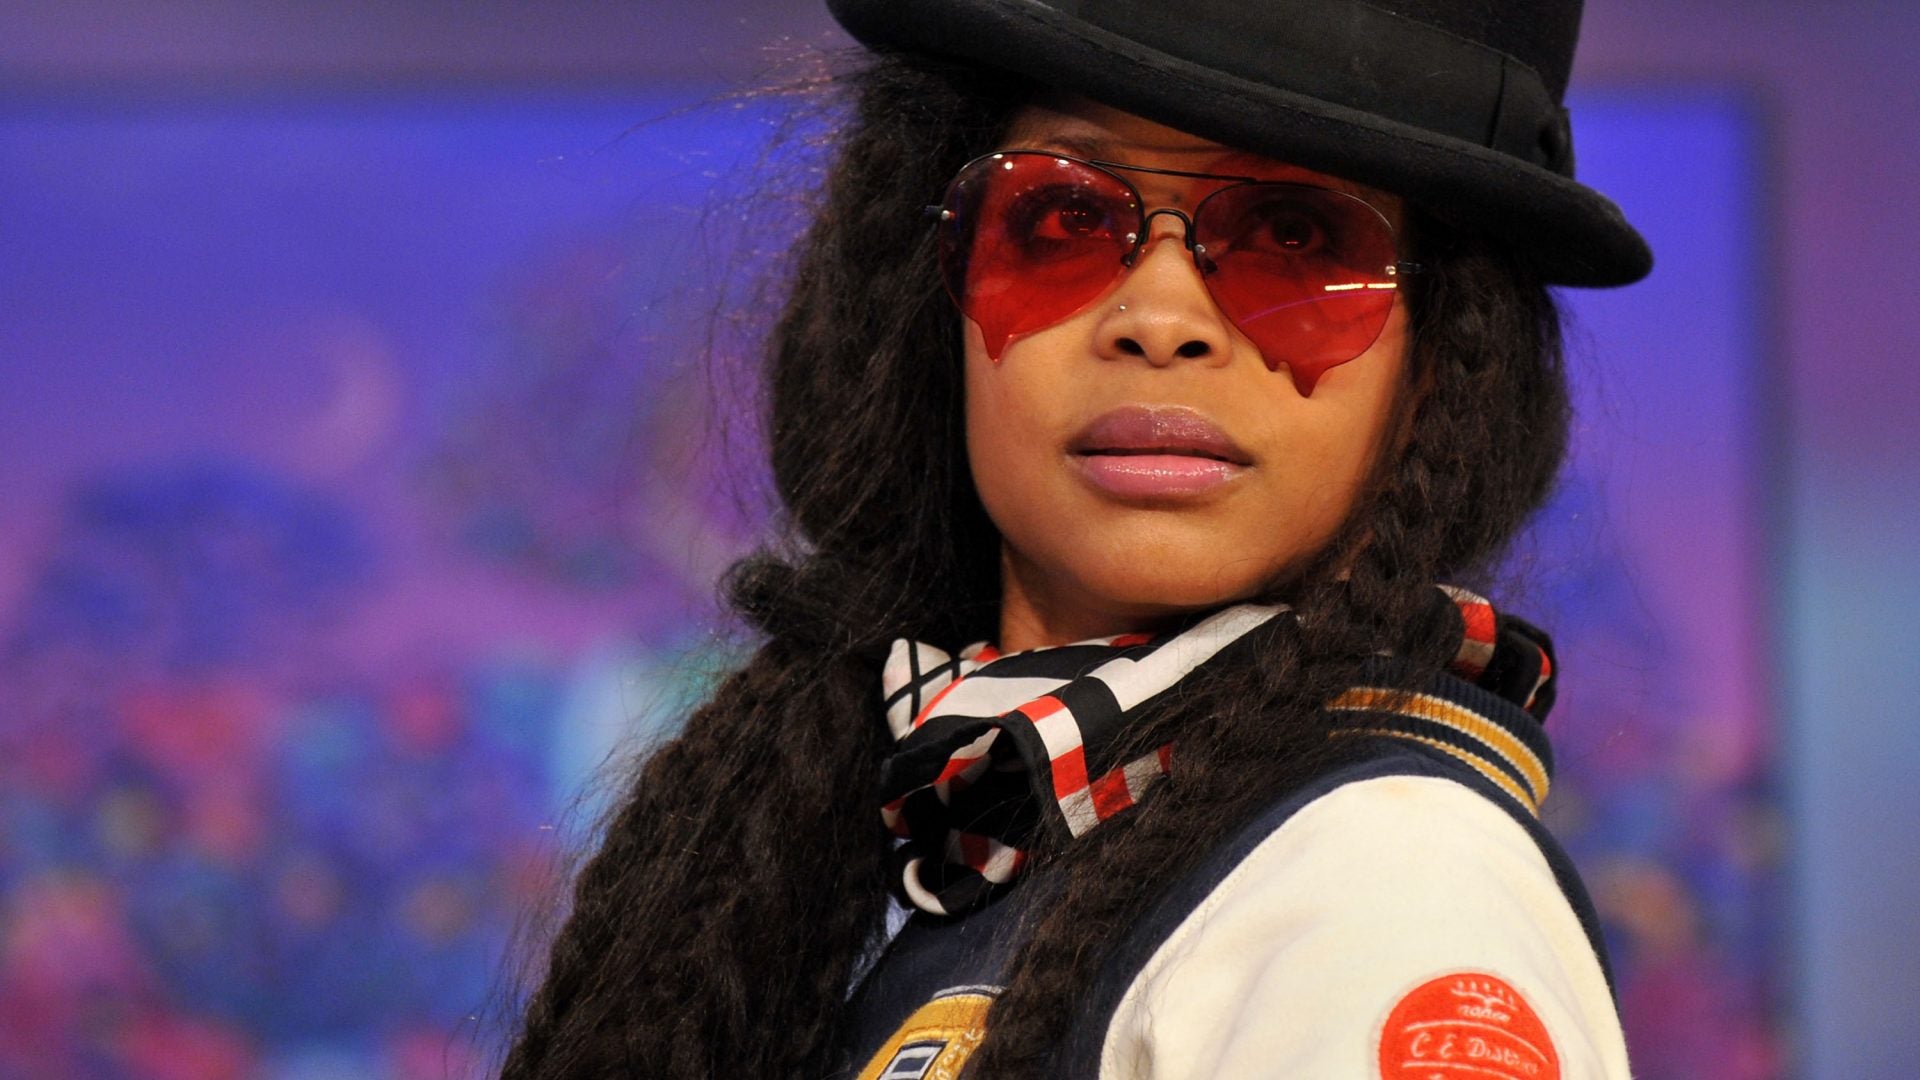 Erykah Badu Just Shared Her Confusing COVID-19 Results